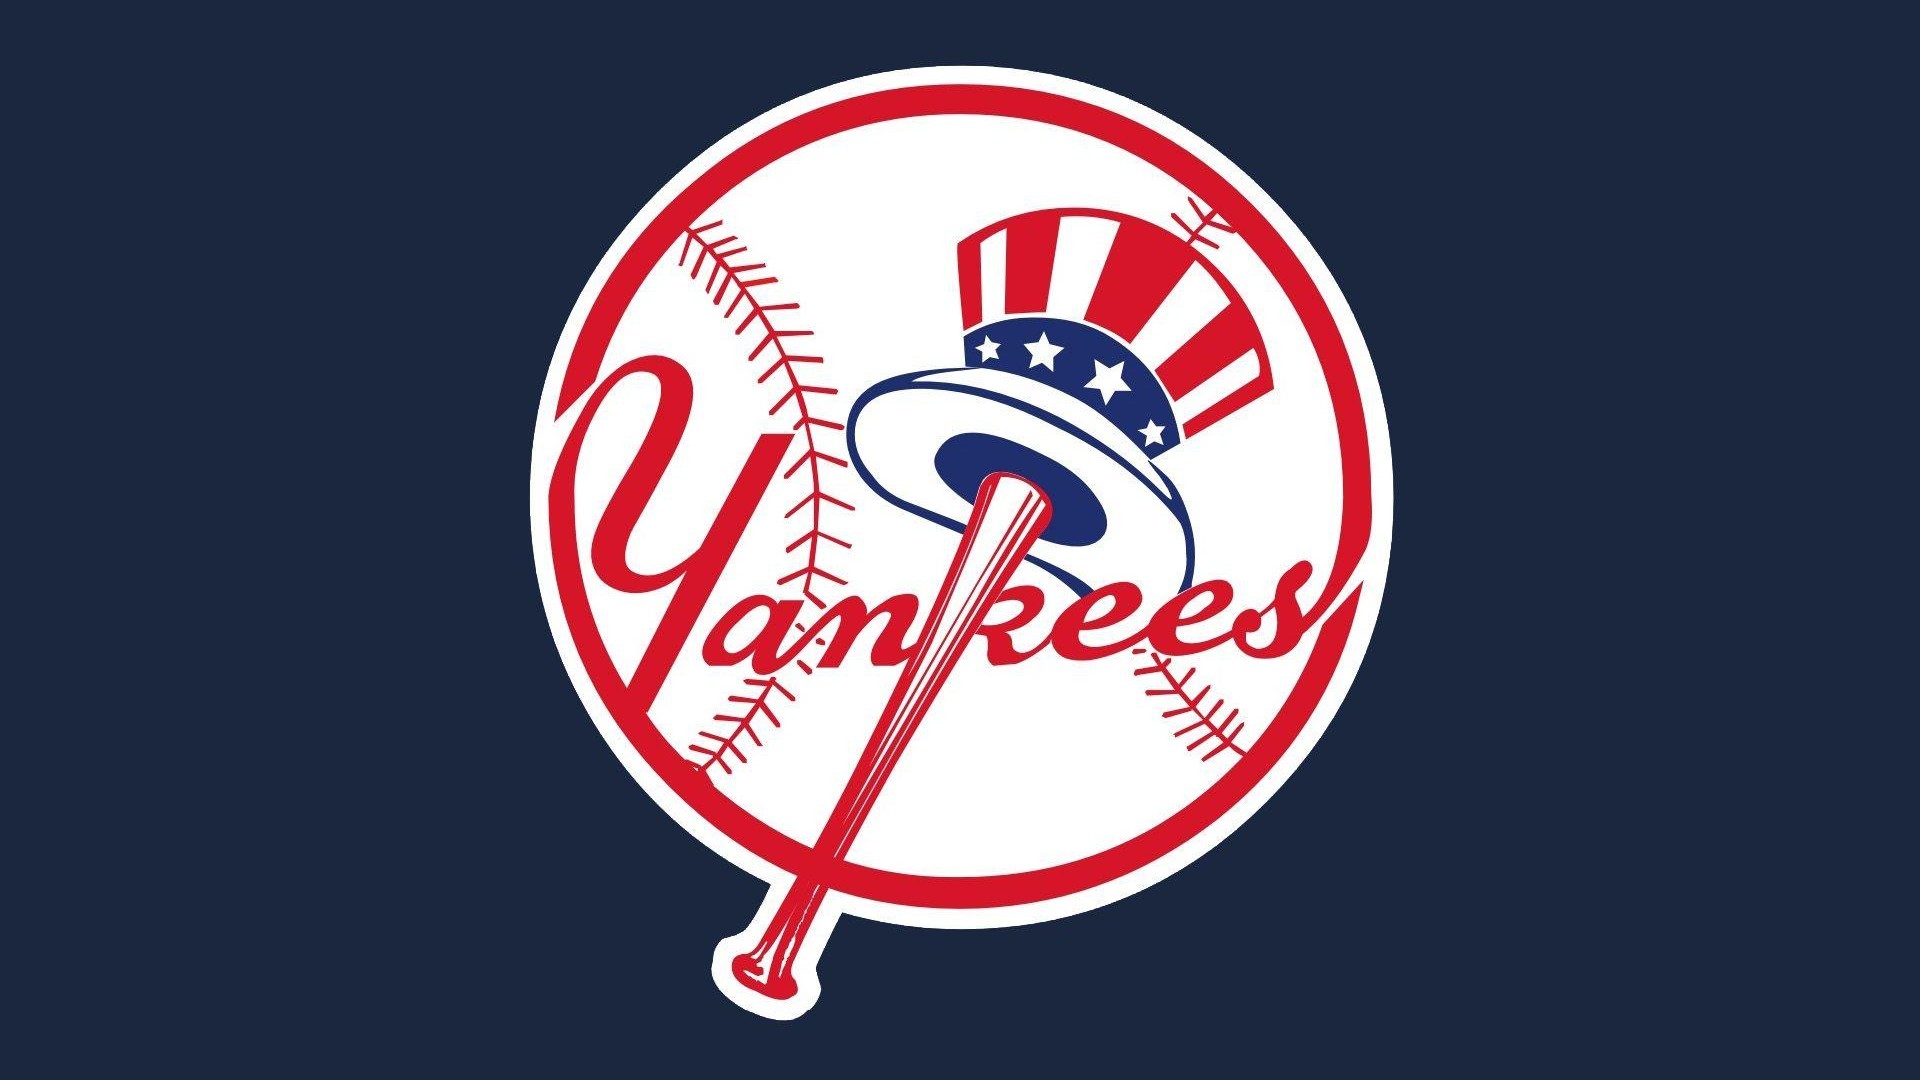 NY Yankees Laptop Wallpaper With high-resolution 1920X1080 pixel. You can use this wallpaper for Mac Desktop Wallpaper, Laptop Screensavers, Android Wallpapers, Tablet or iPhone Home Screen and another mobile phone device